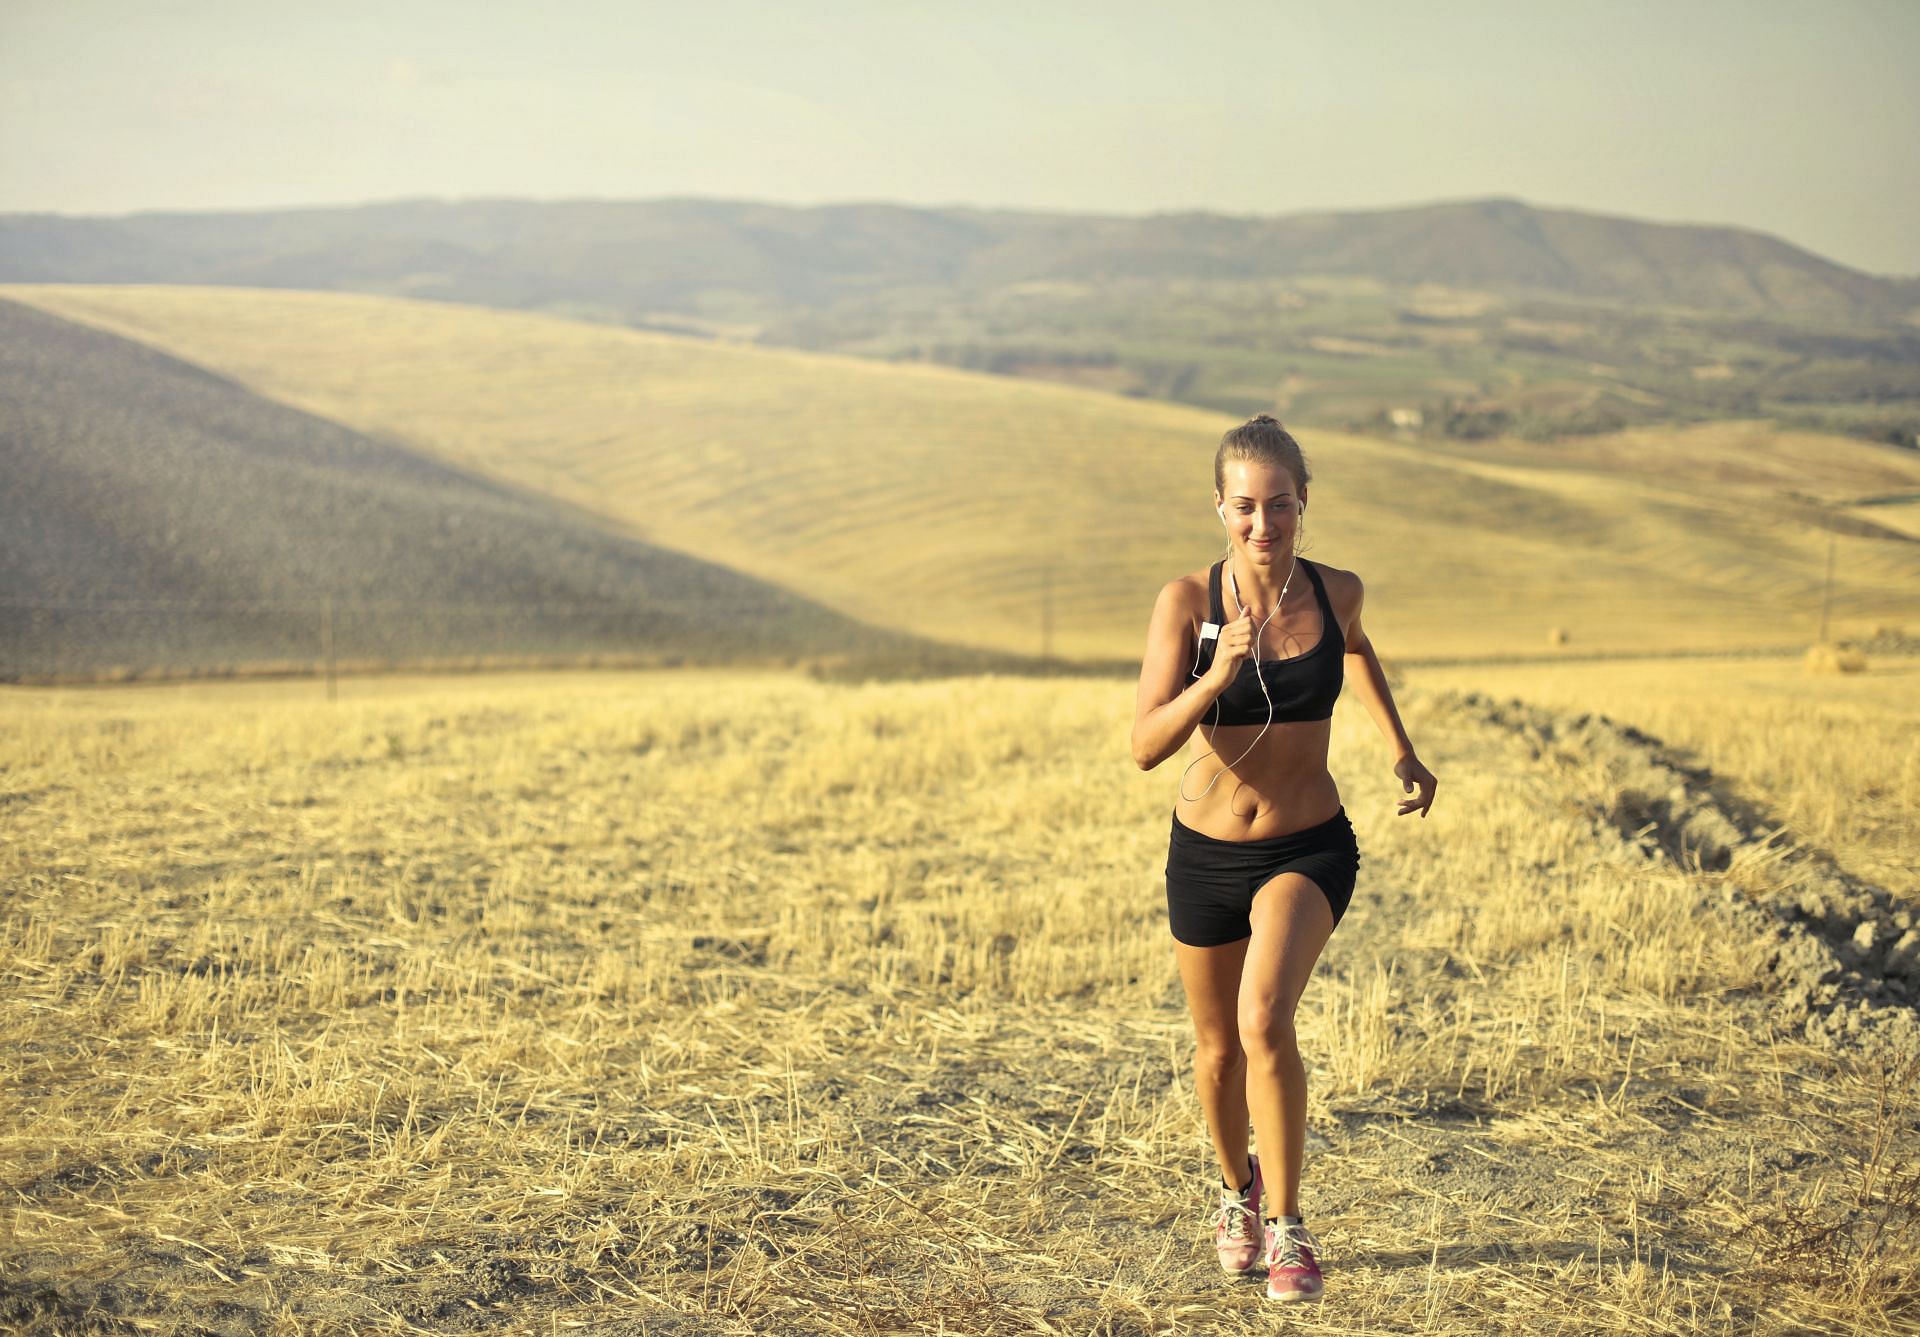 Ectomorphs are adapted for endurance activities like long-distance running (Image via Pexels/Andrea Piacquadio)